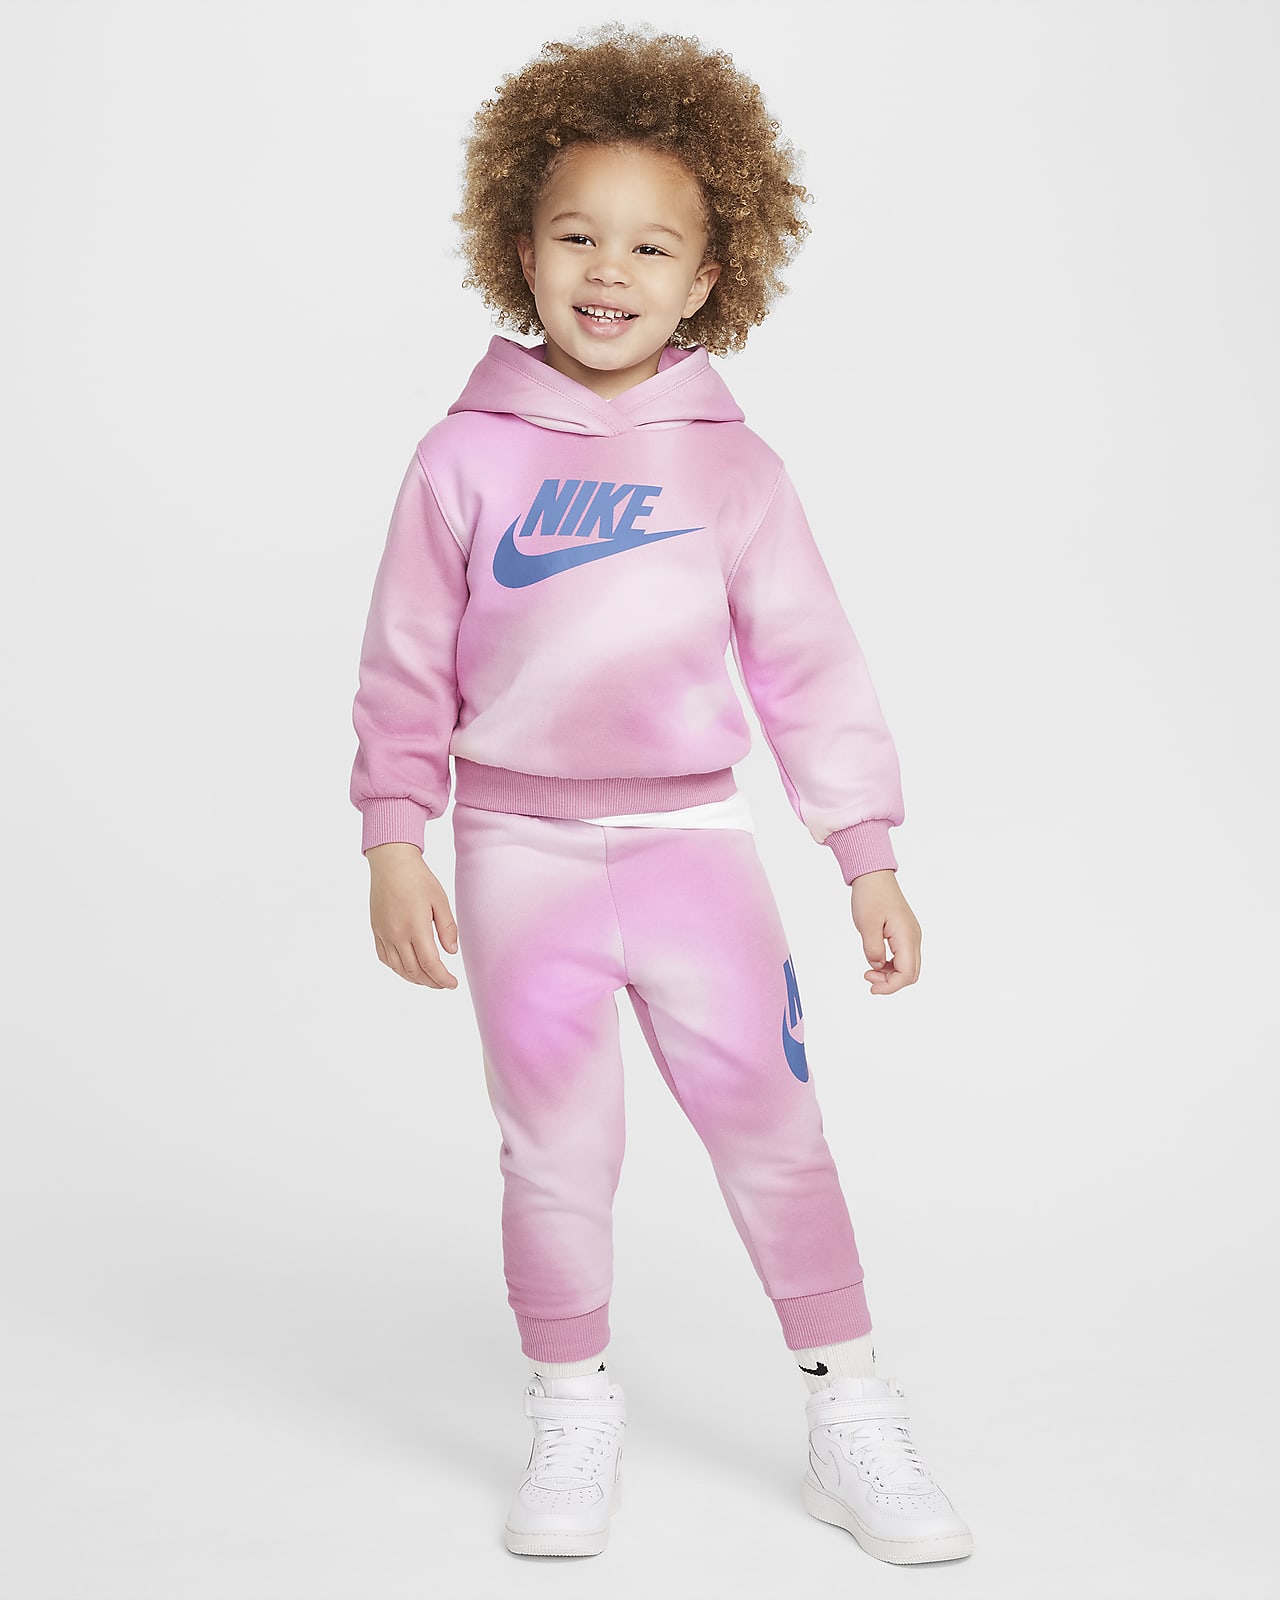 Nike Solarized Toddler Pullover Hoodie and Pants Set